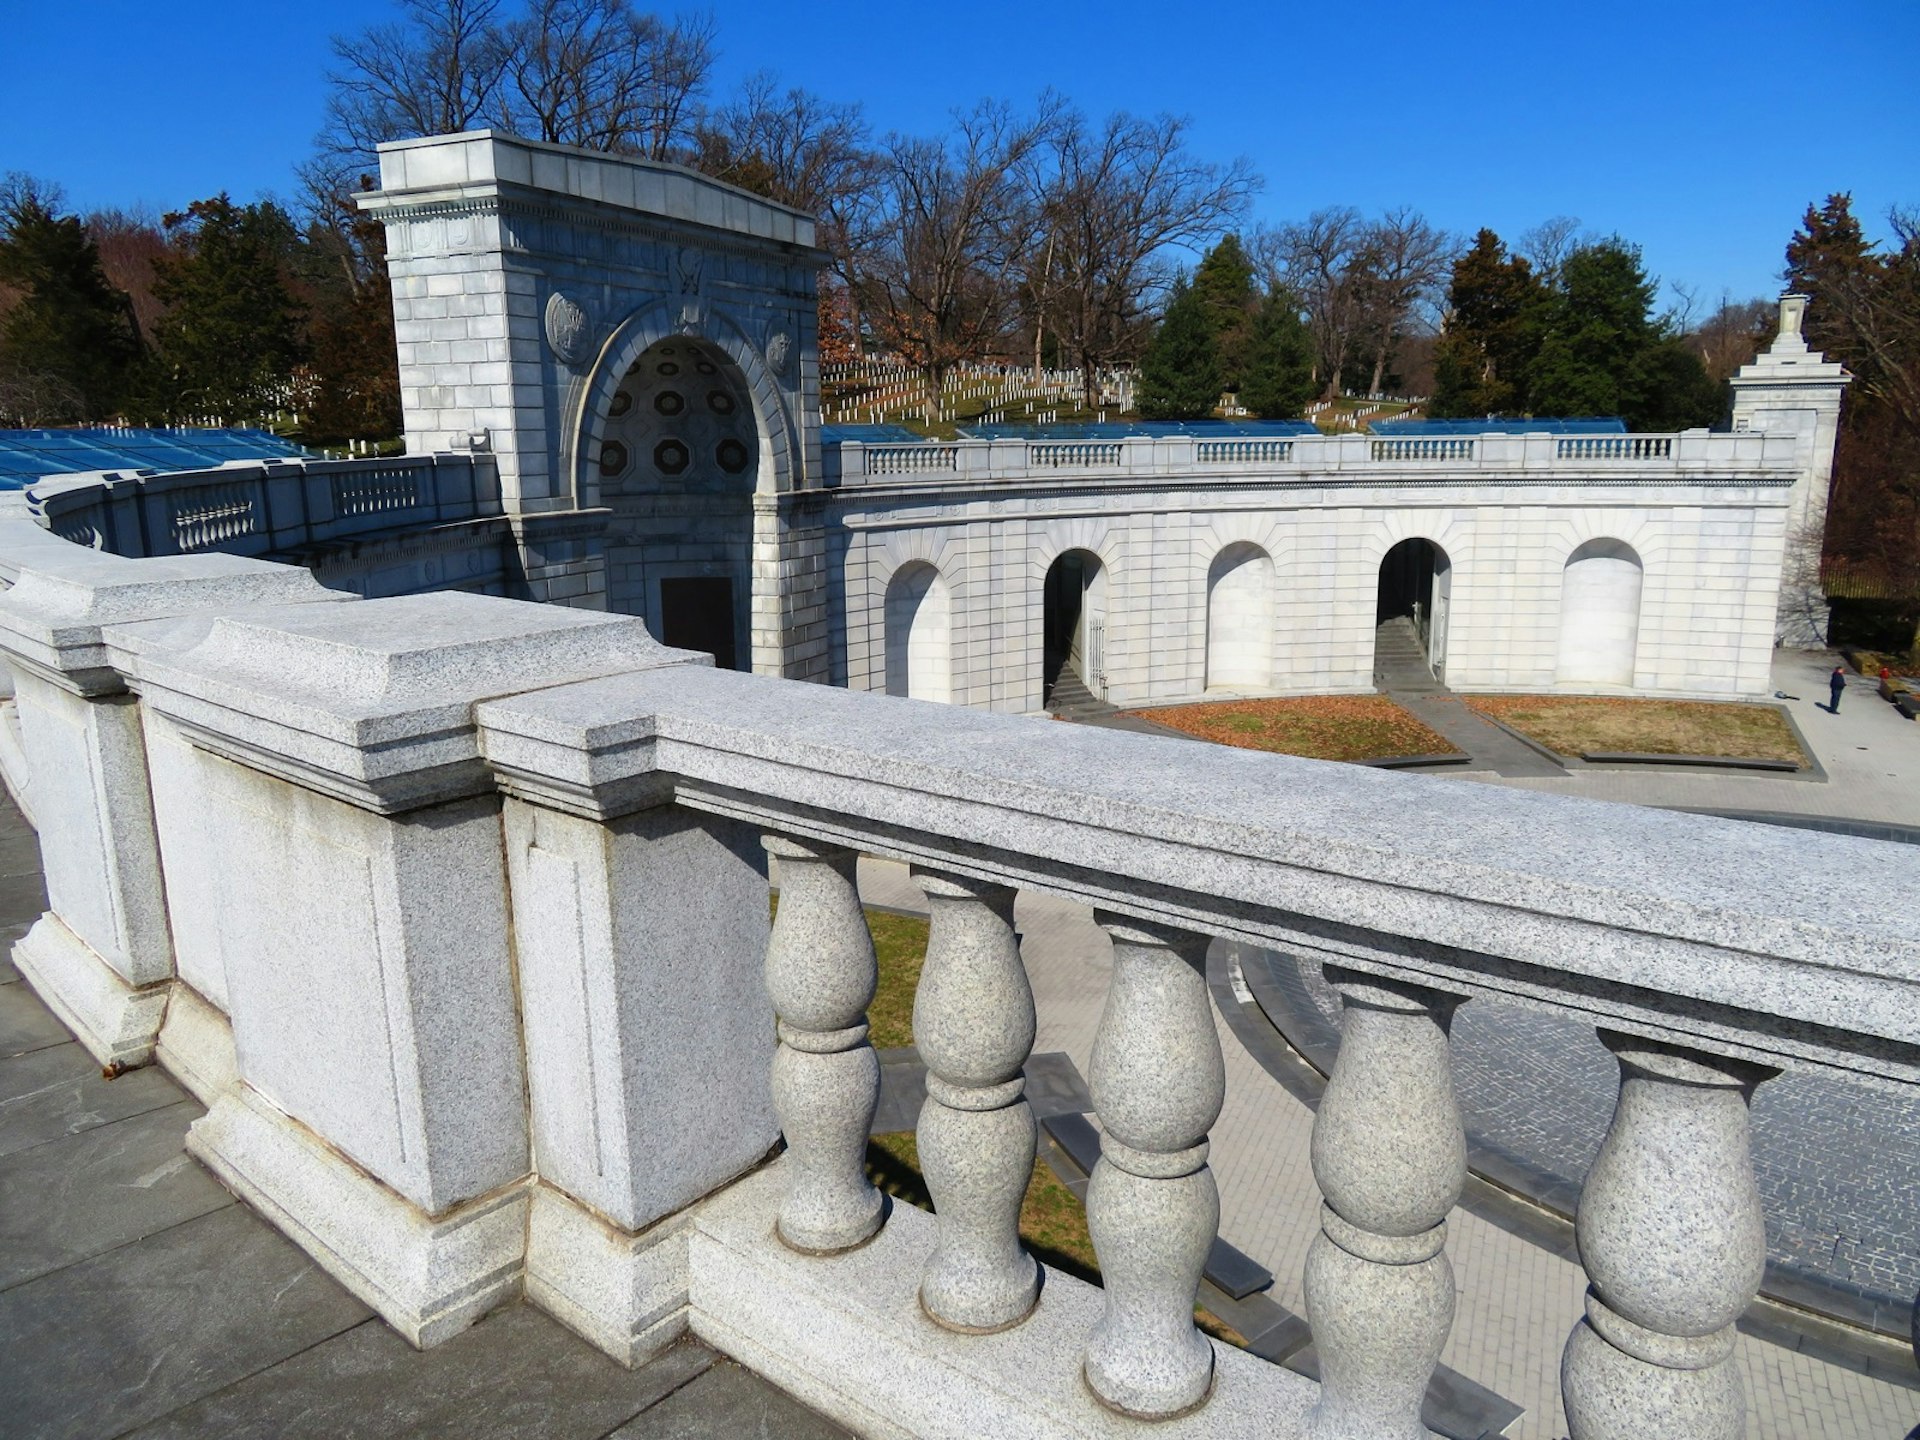 A curved wall with arches and pillars marks a memorial in Washington, DC